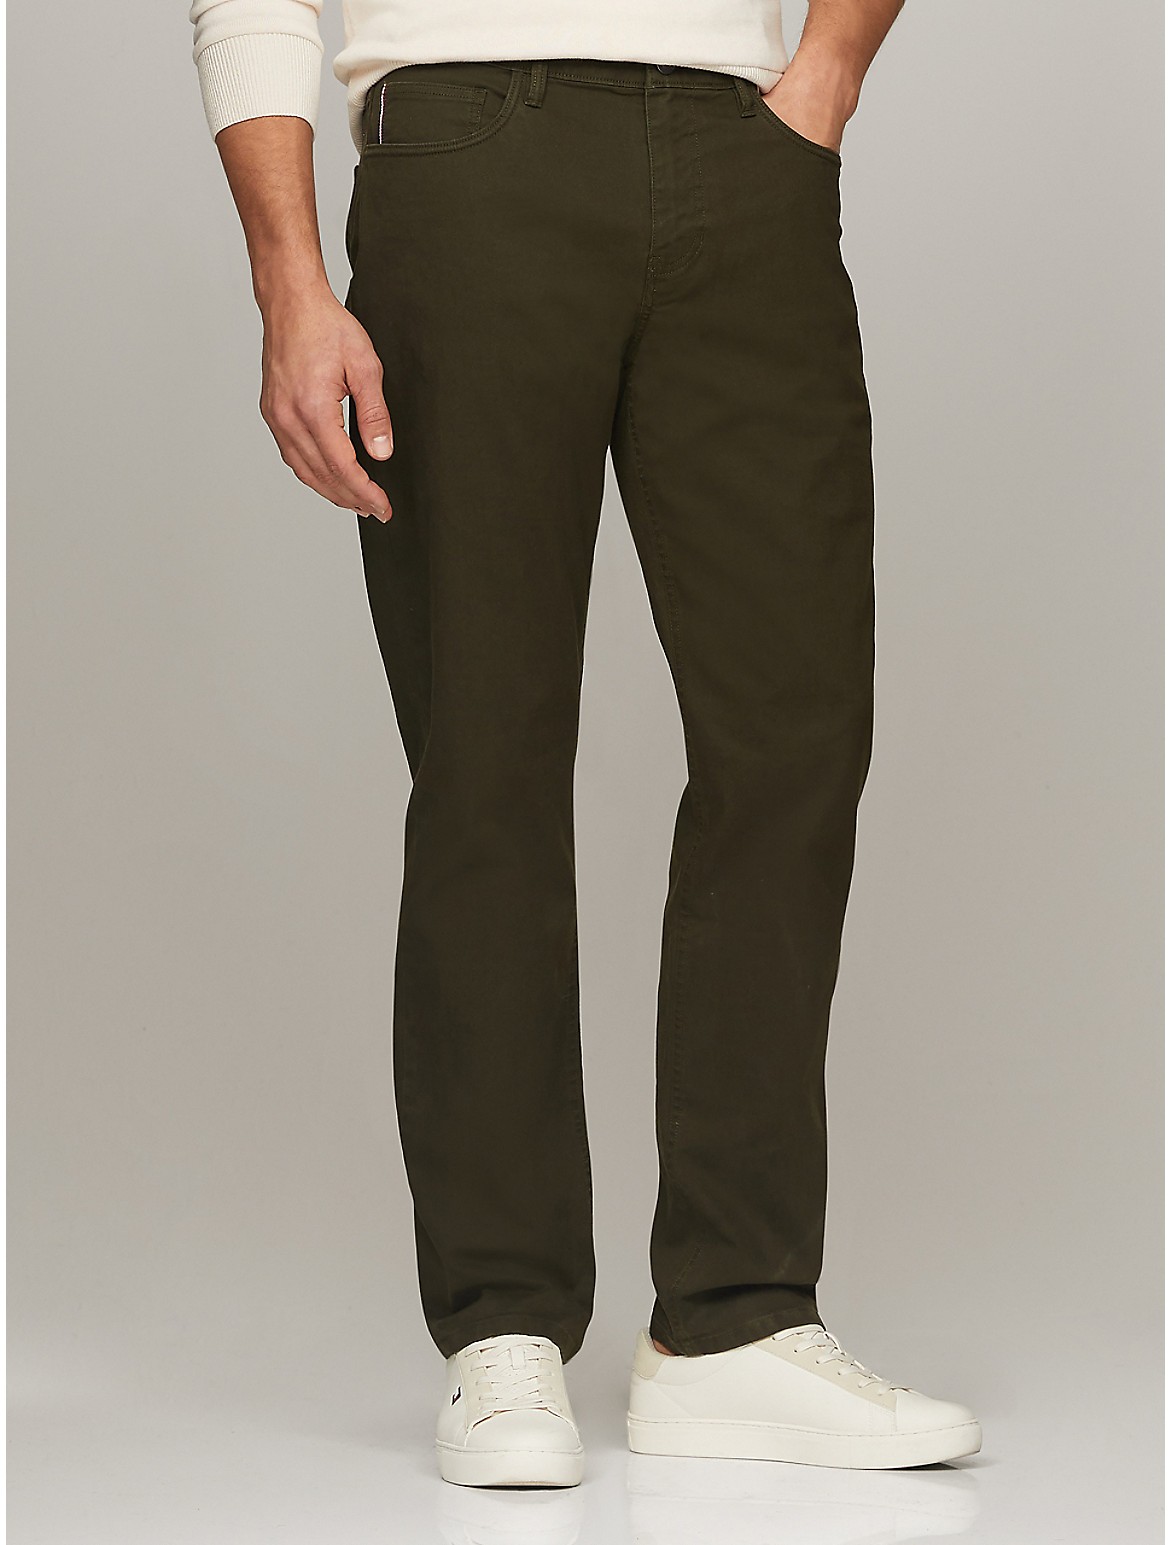 Tommy Hilfiger Men's Straight Fit Twill Pant